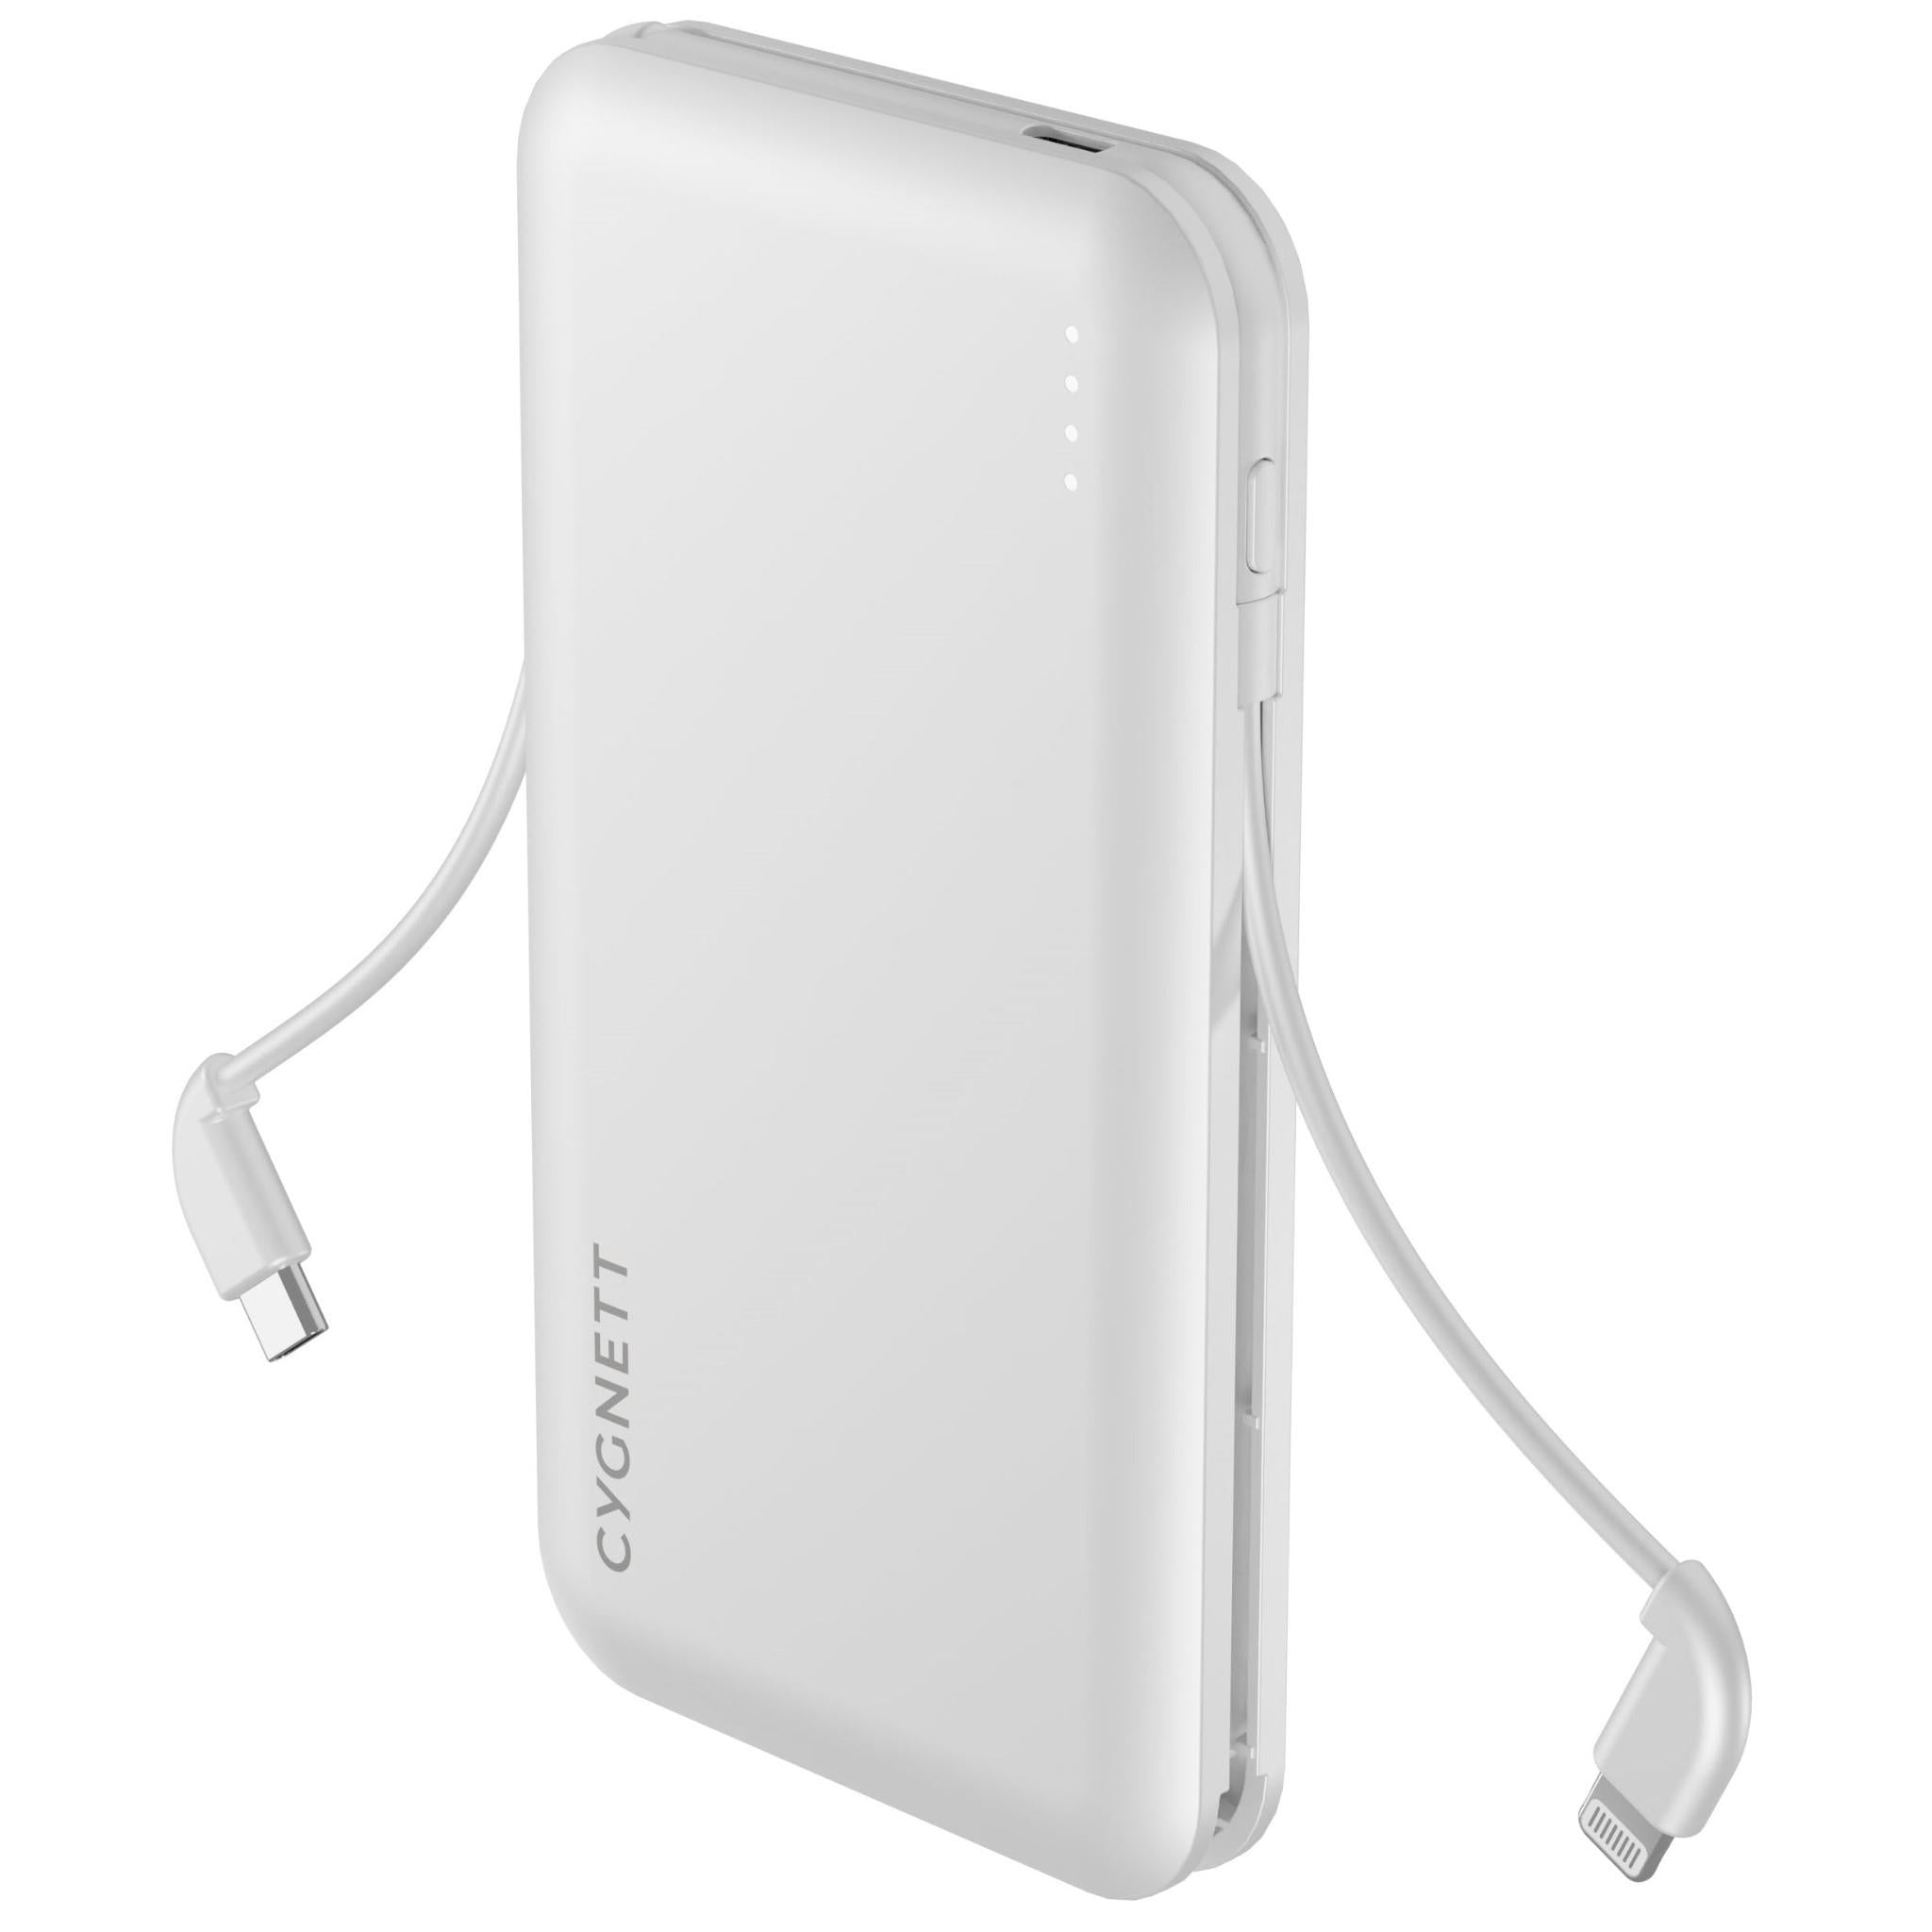 cygnett chargeup pocket 10k power bank with dual intergrated charging cables (white)